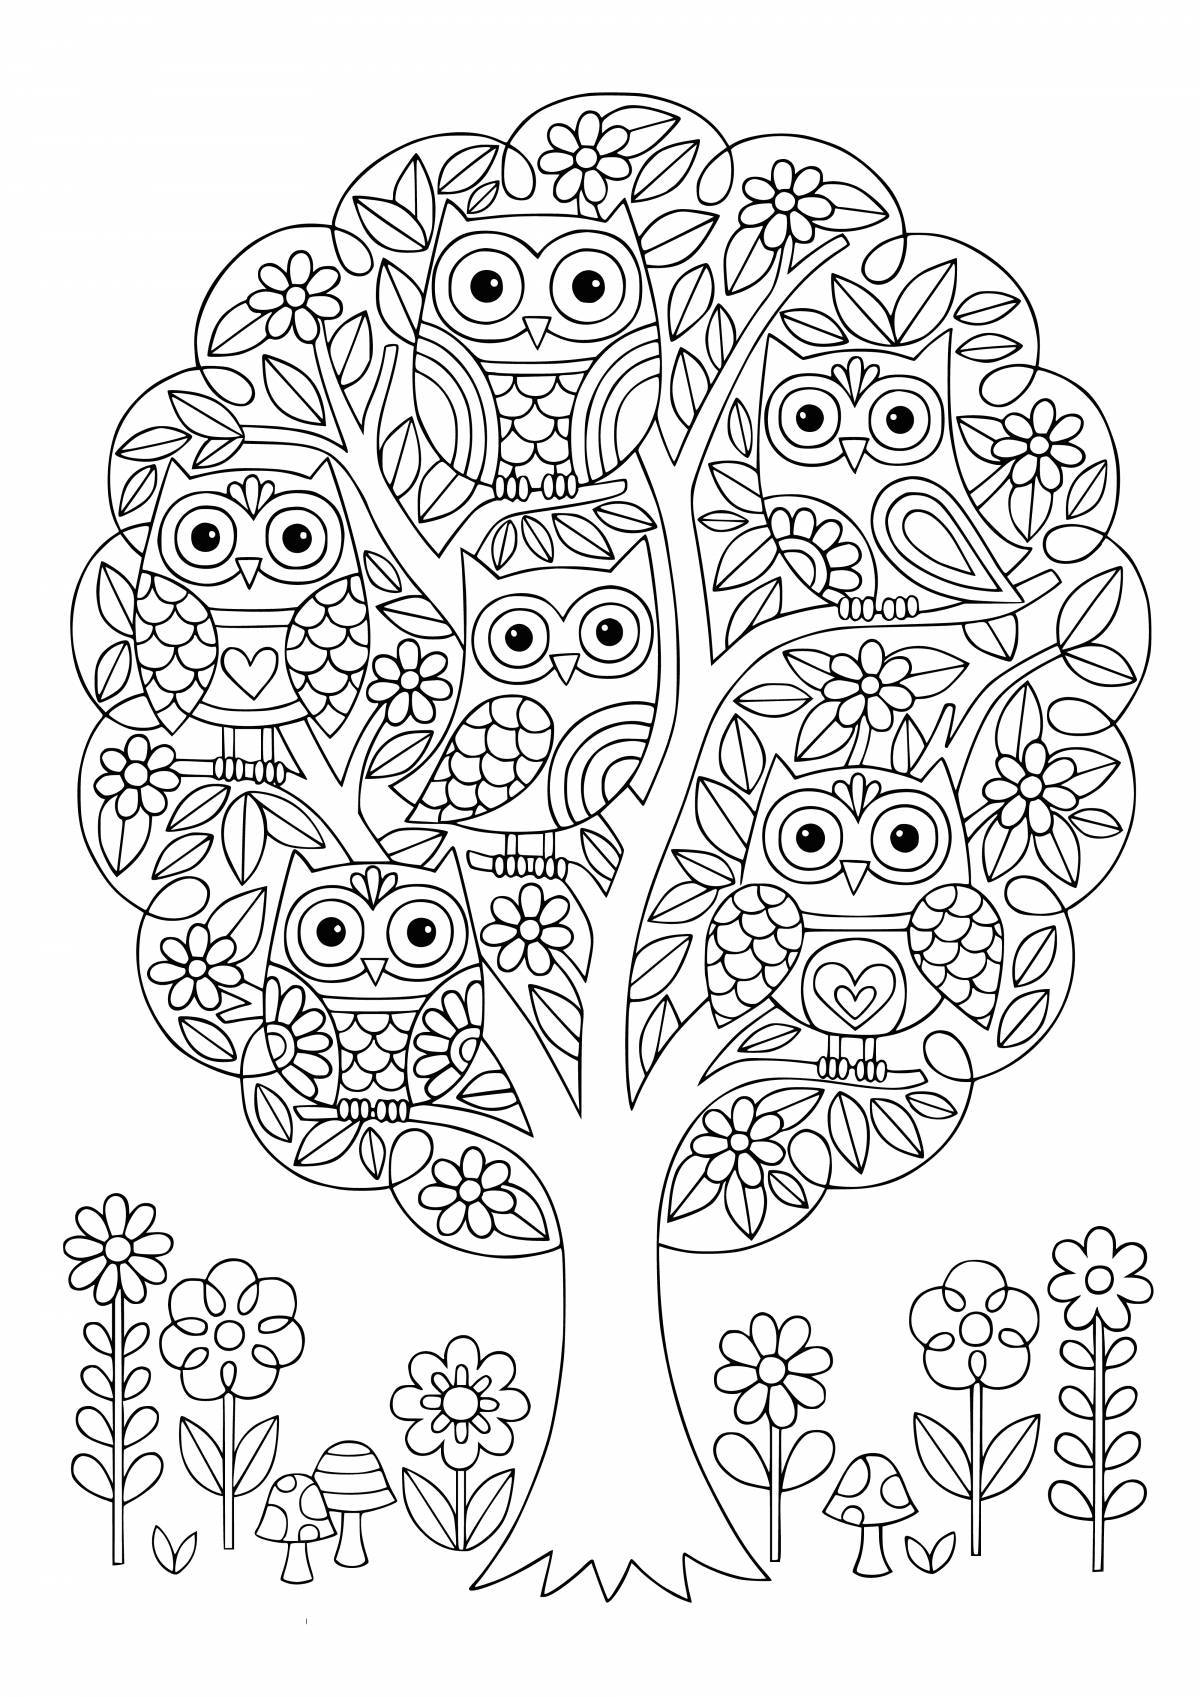 A fun anti-stress coloring book for kids 6-7 years old